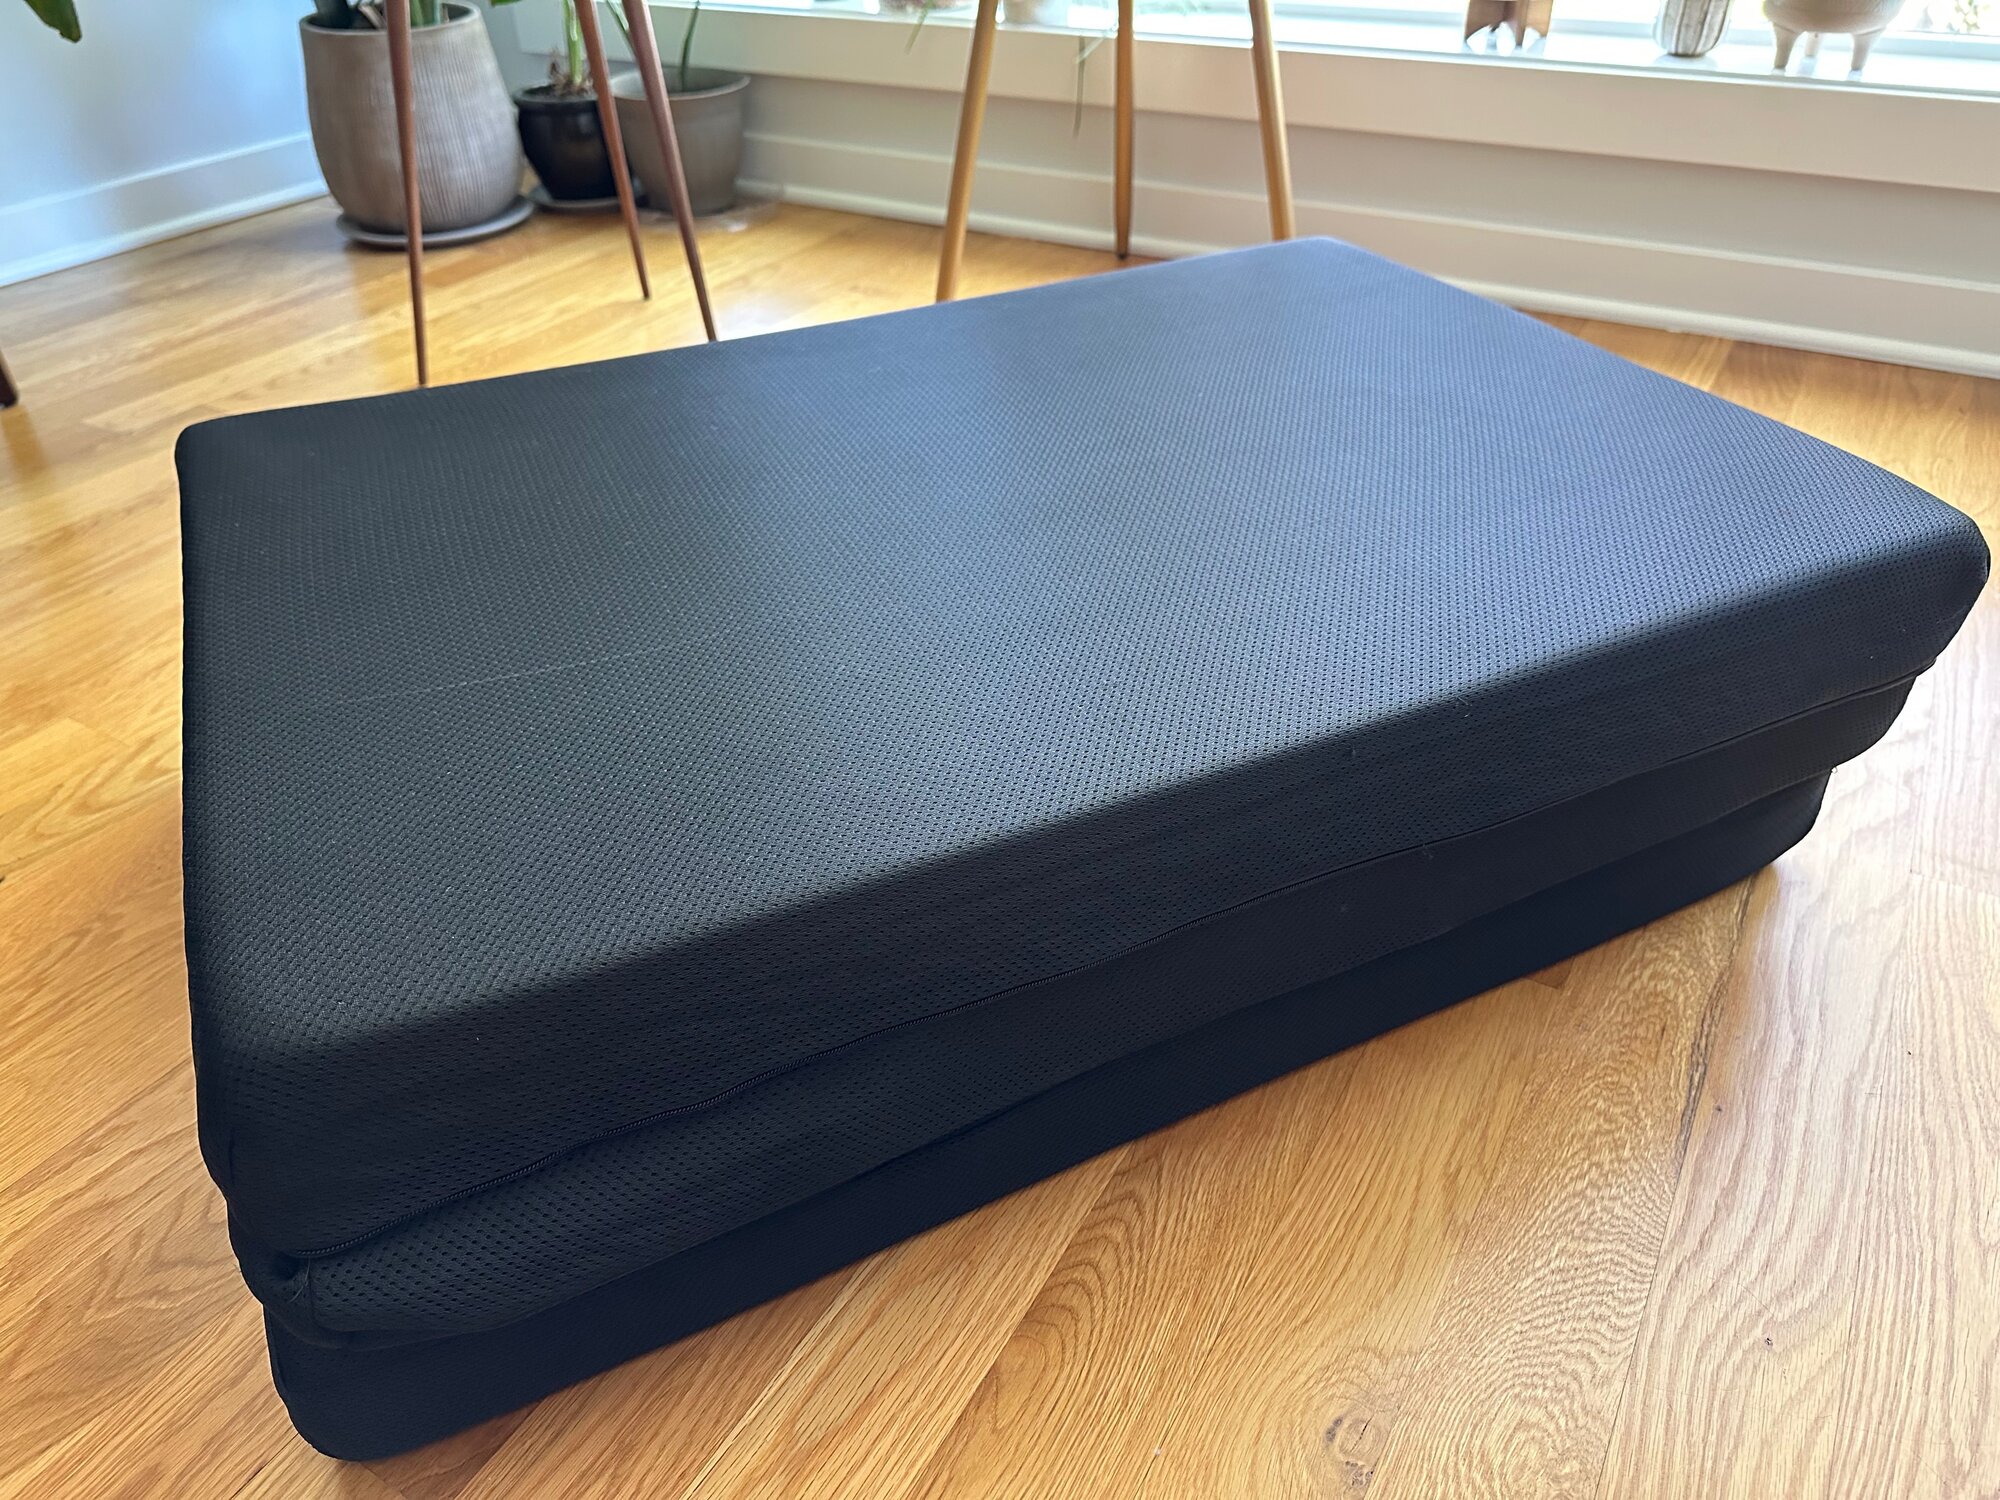 Tesla Model Y Foam Camping Mattress - In Chicago - Never used. $85